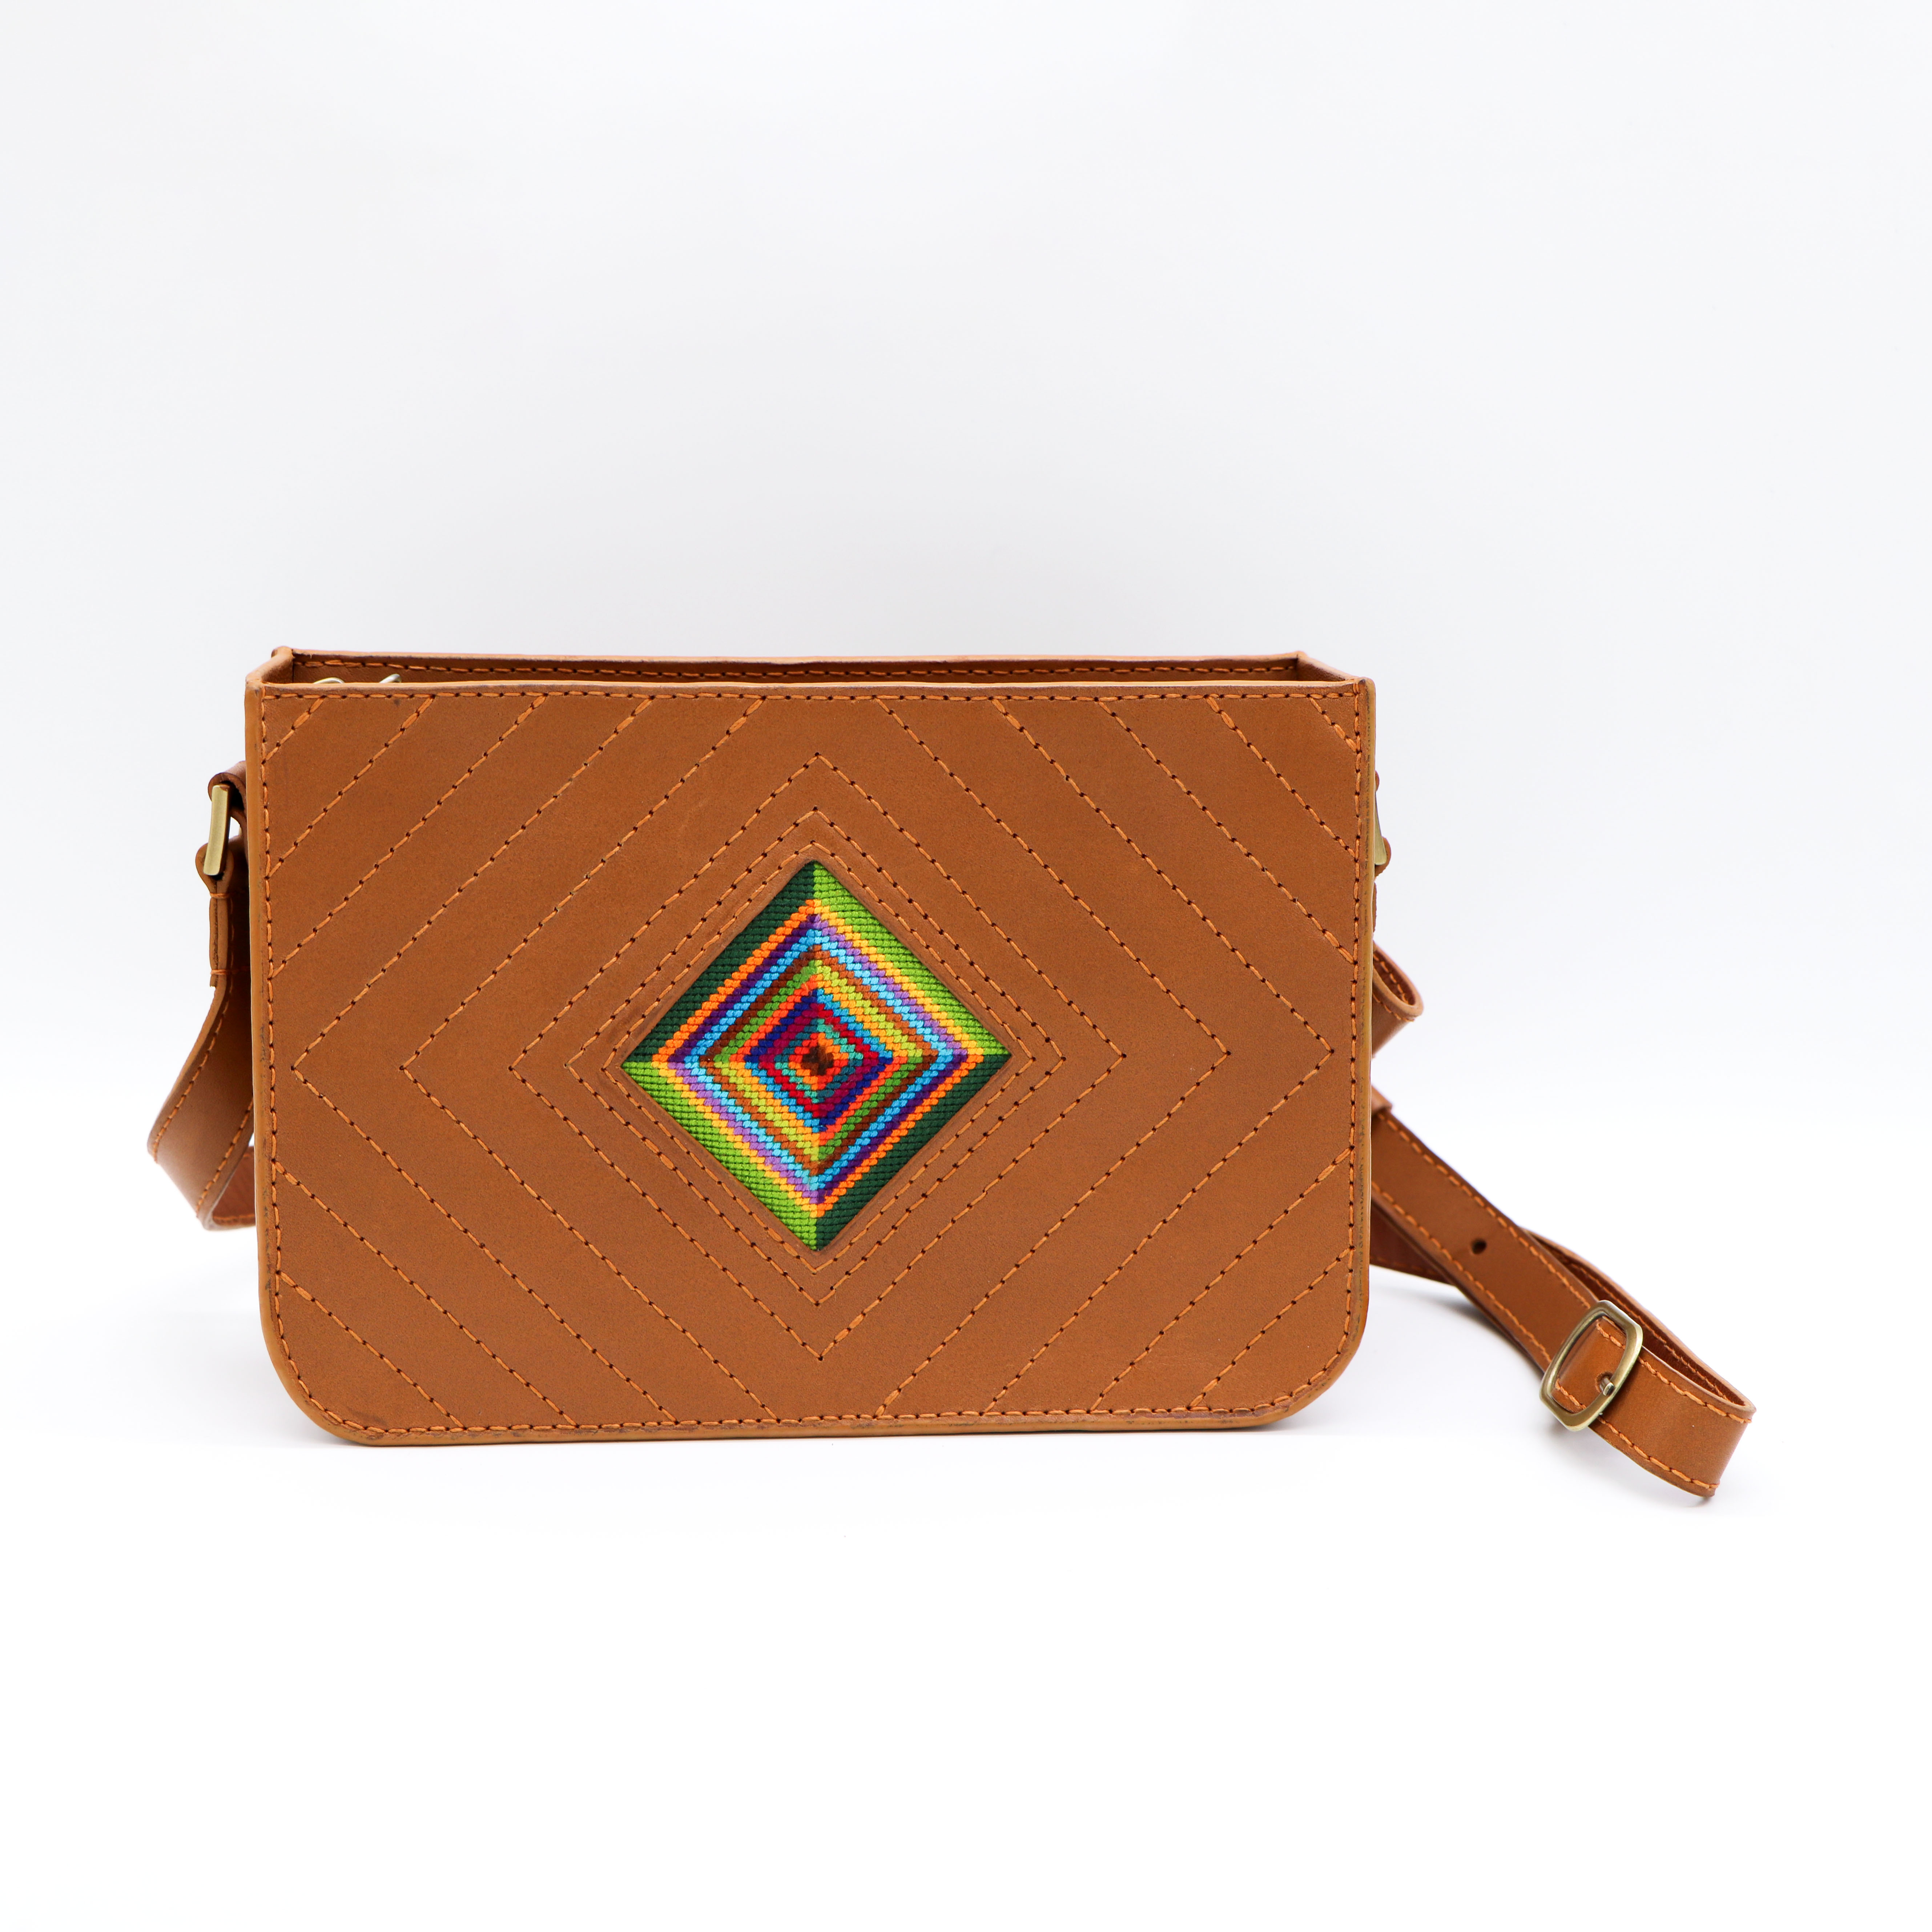 Genuine leather bag with colorful Cross-stitching